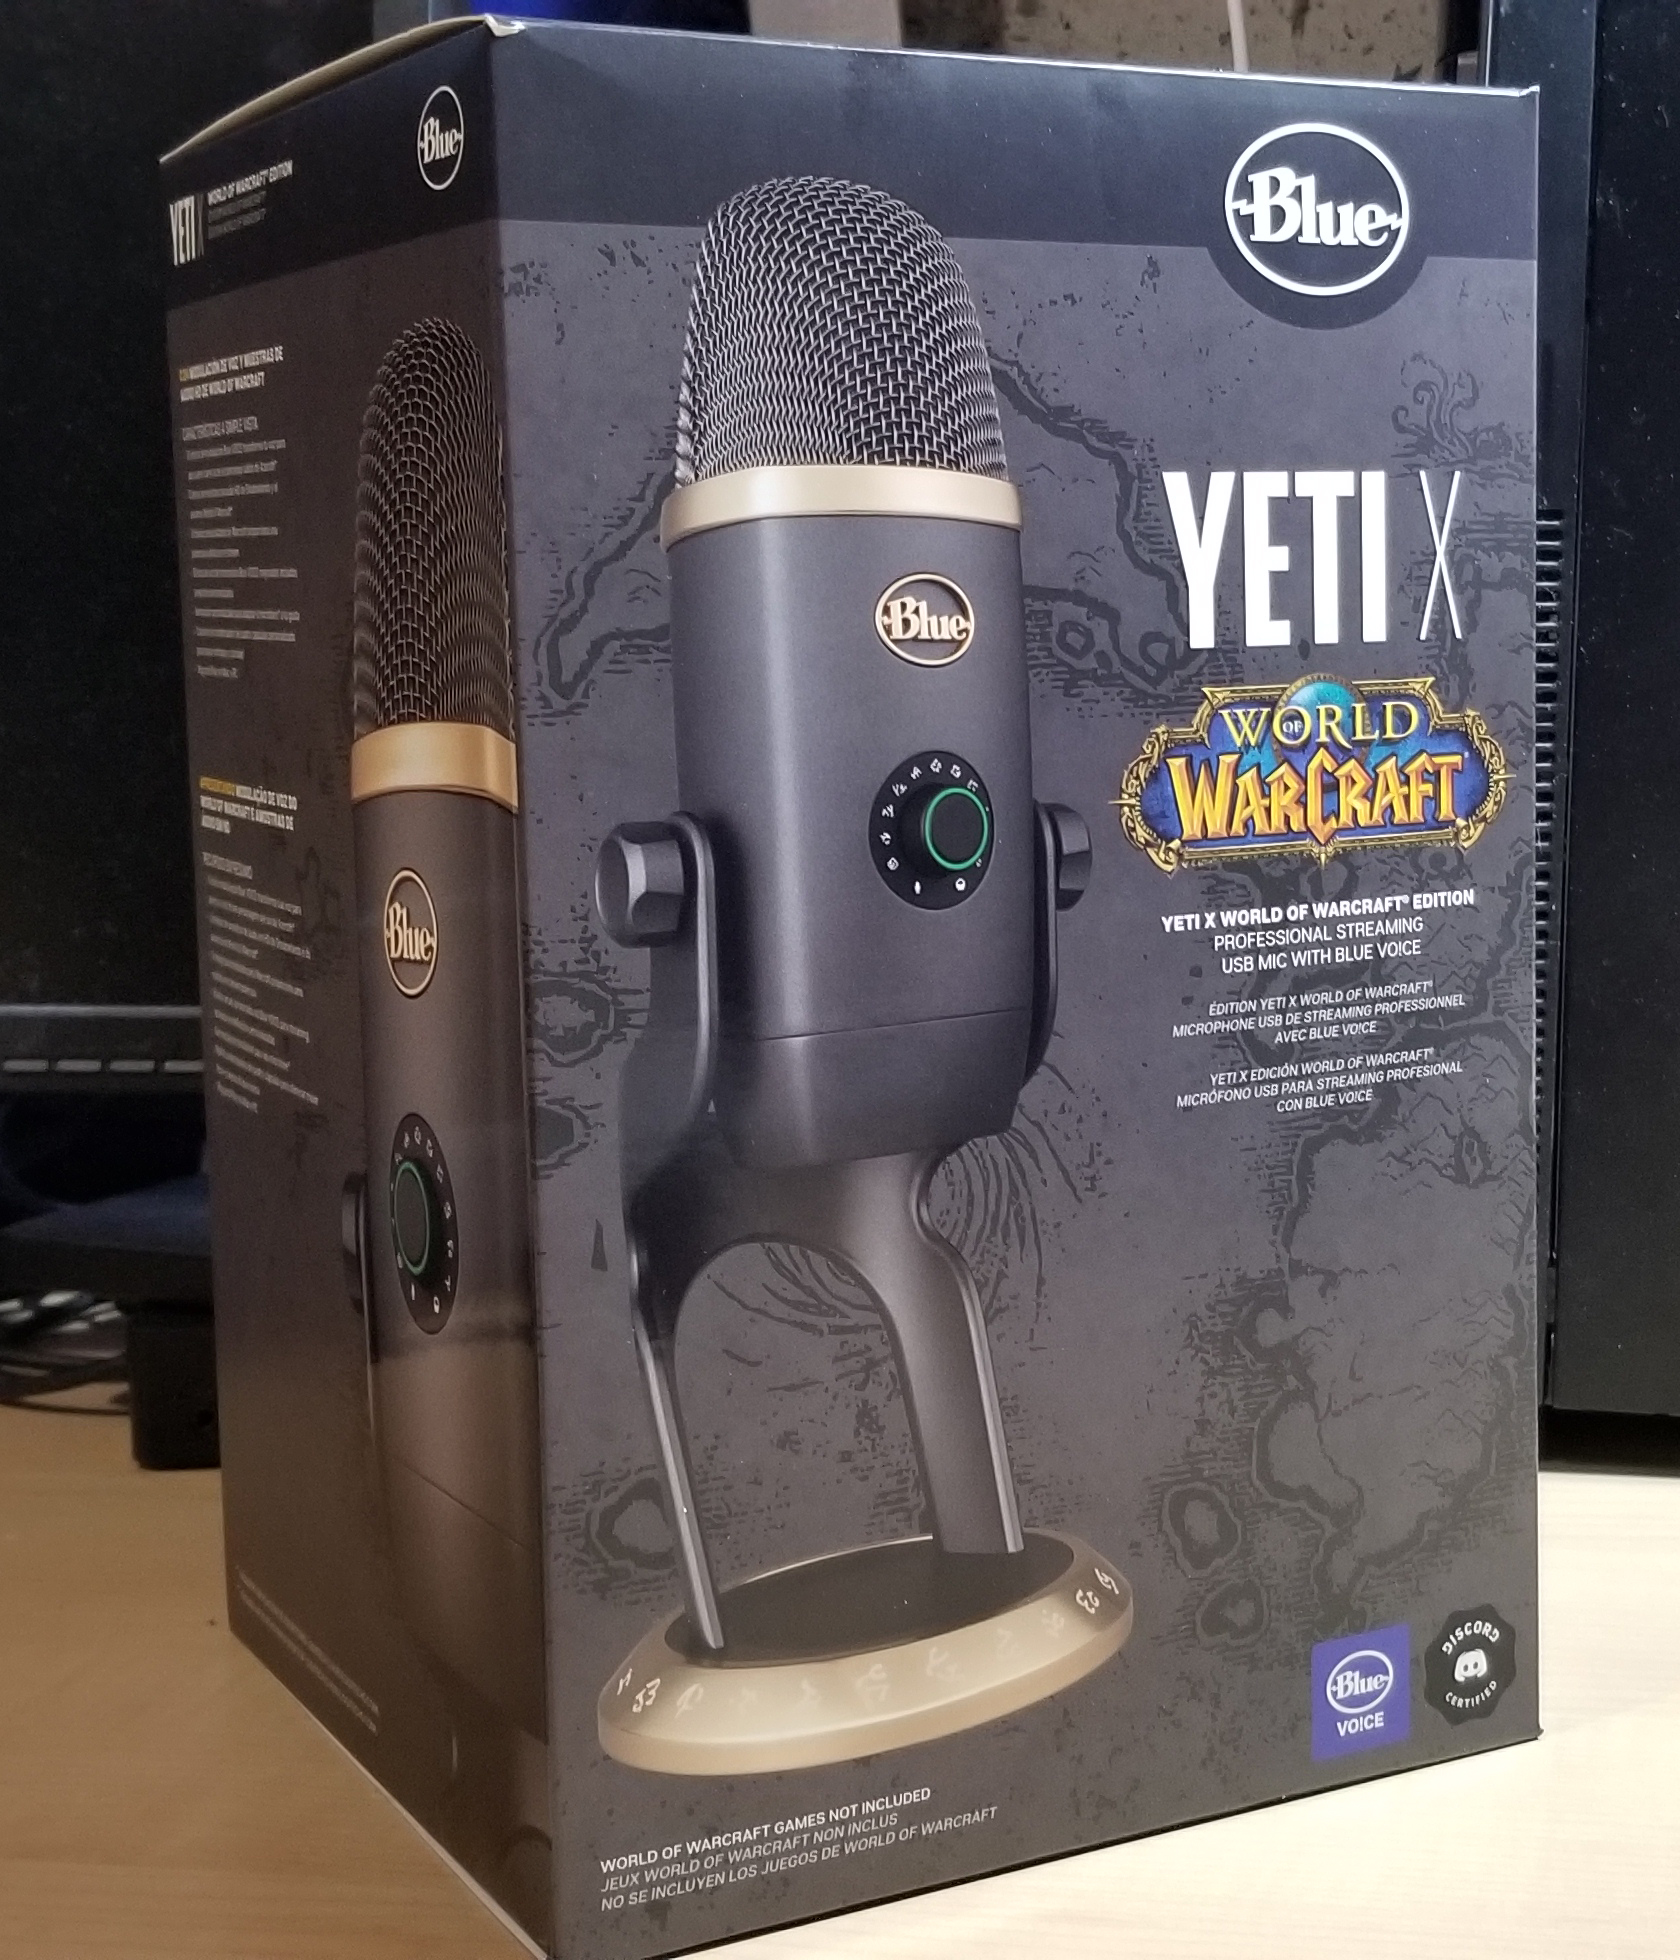 https://www.twice.com/product/accessories/gaming/review-blue-yeti-x-world-of-warcraft-edition-usb-microphone/attachment/wow-blue-yeti-x_image-6-2